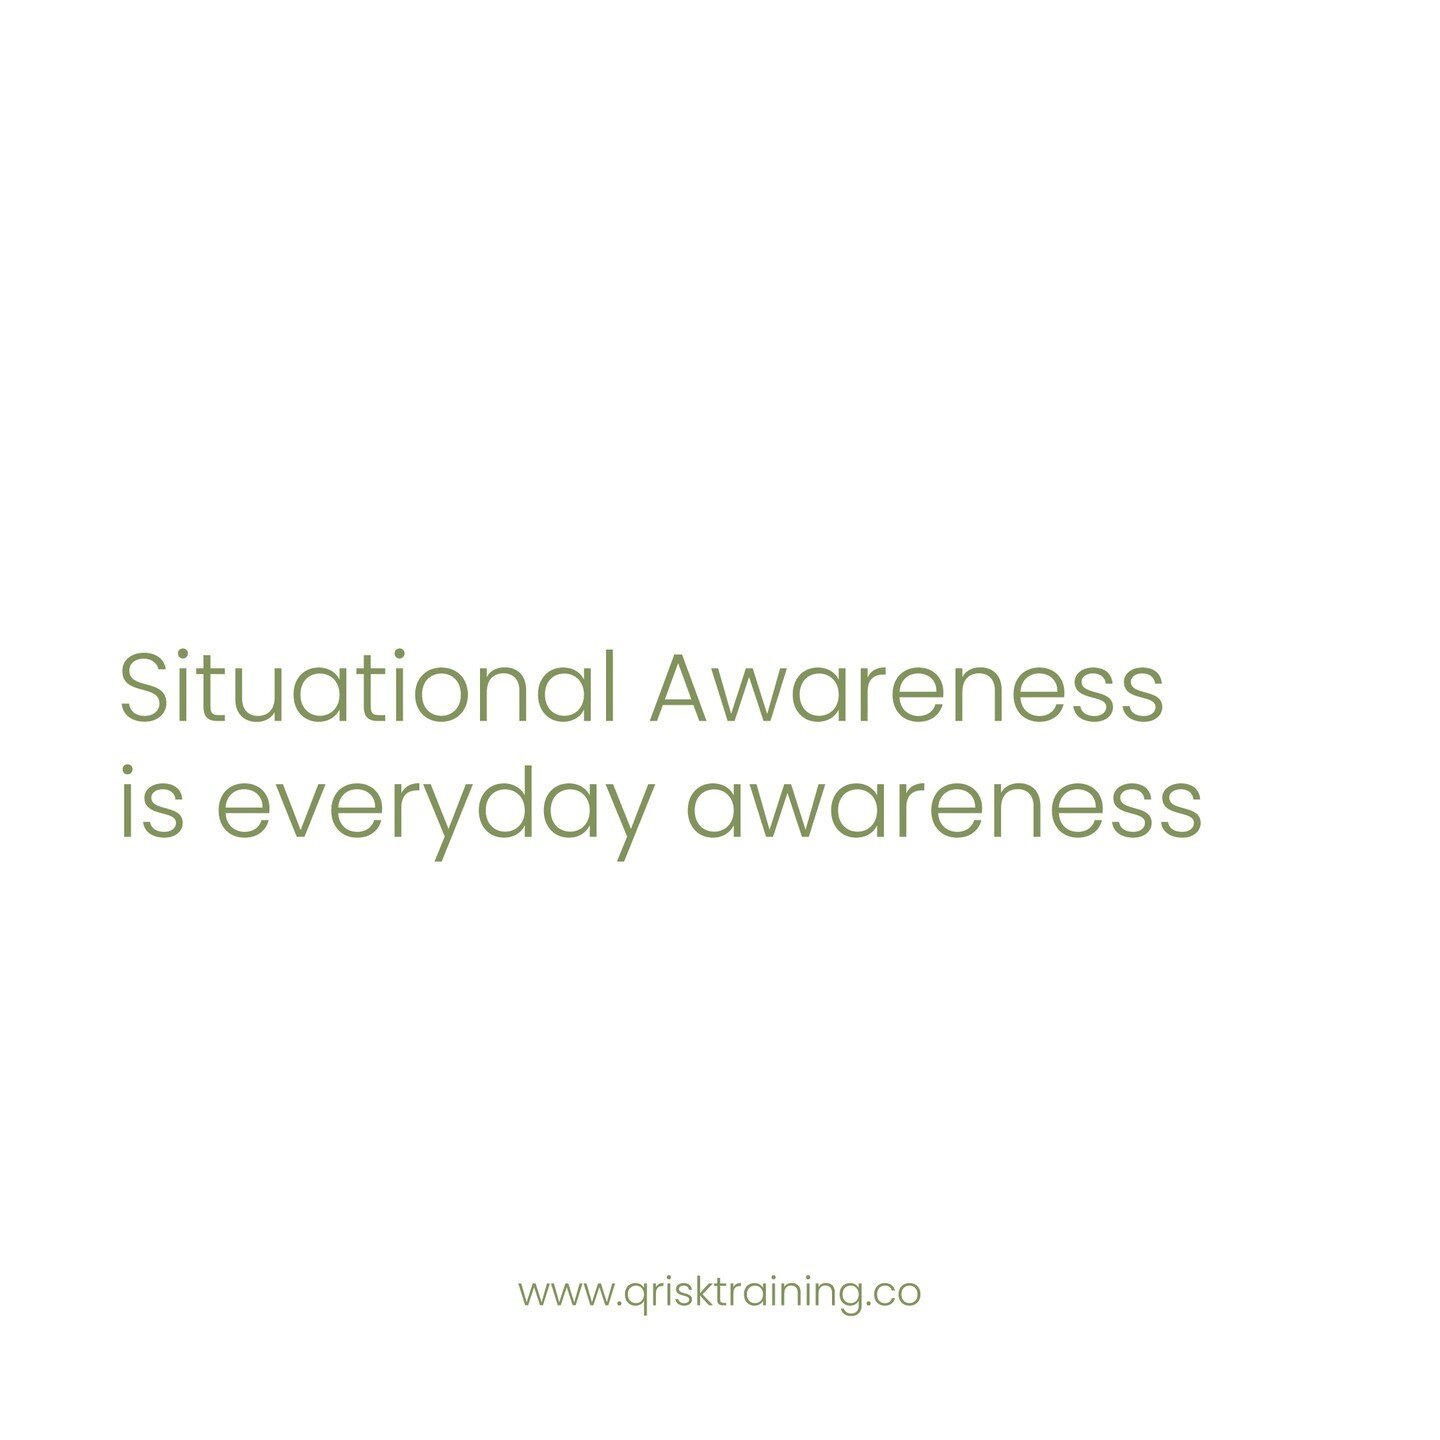 We teach situational awareness as a life skill.⁠
⁠
Give your staff the life skill of situational awareness and how to de-escalate conflict though our unique framework and simple tactics.⁠
⁠
We can tailor the course to be unique to your industry and e